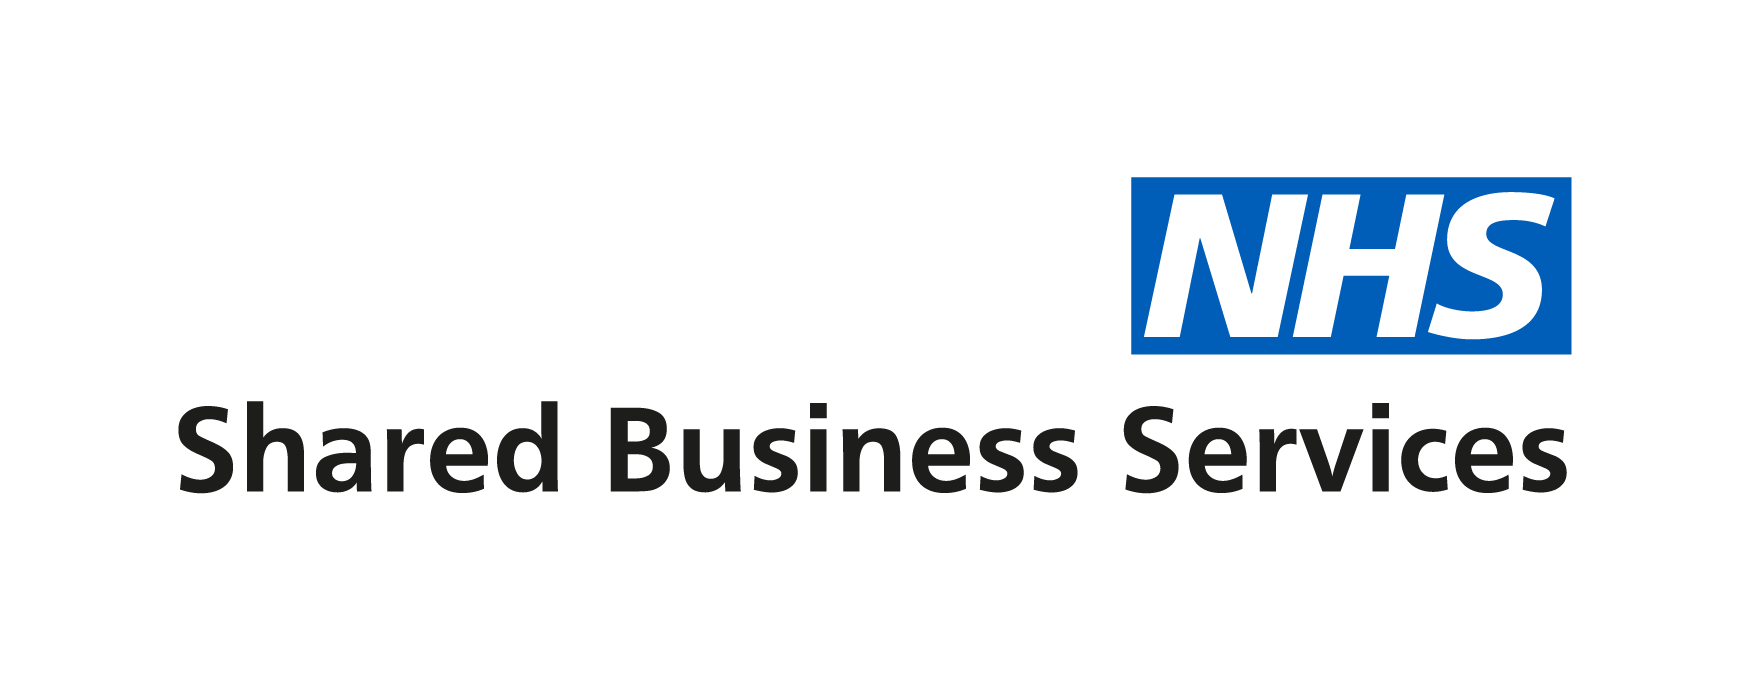 NHS SBS awarded UK’s Best Workplaces recognition